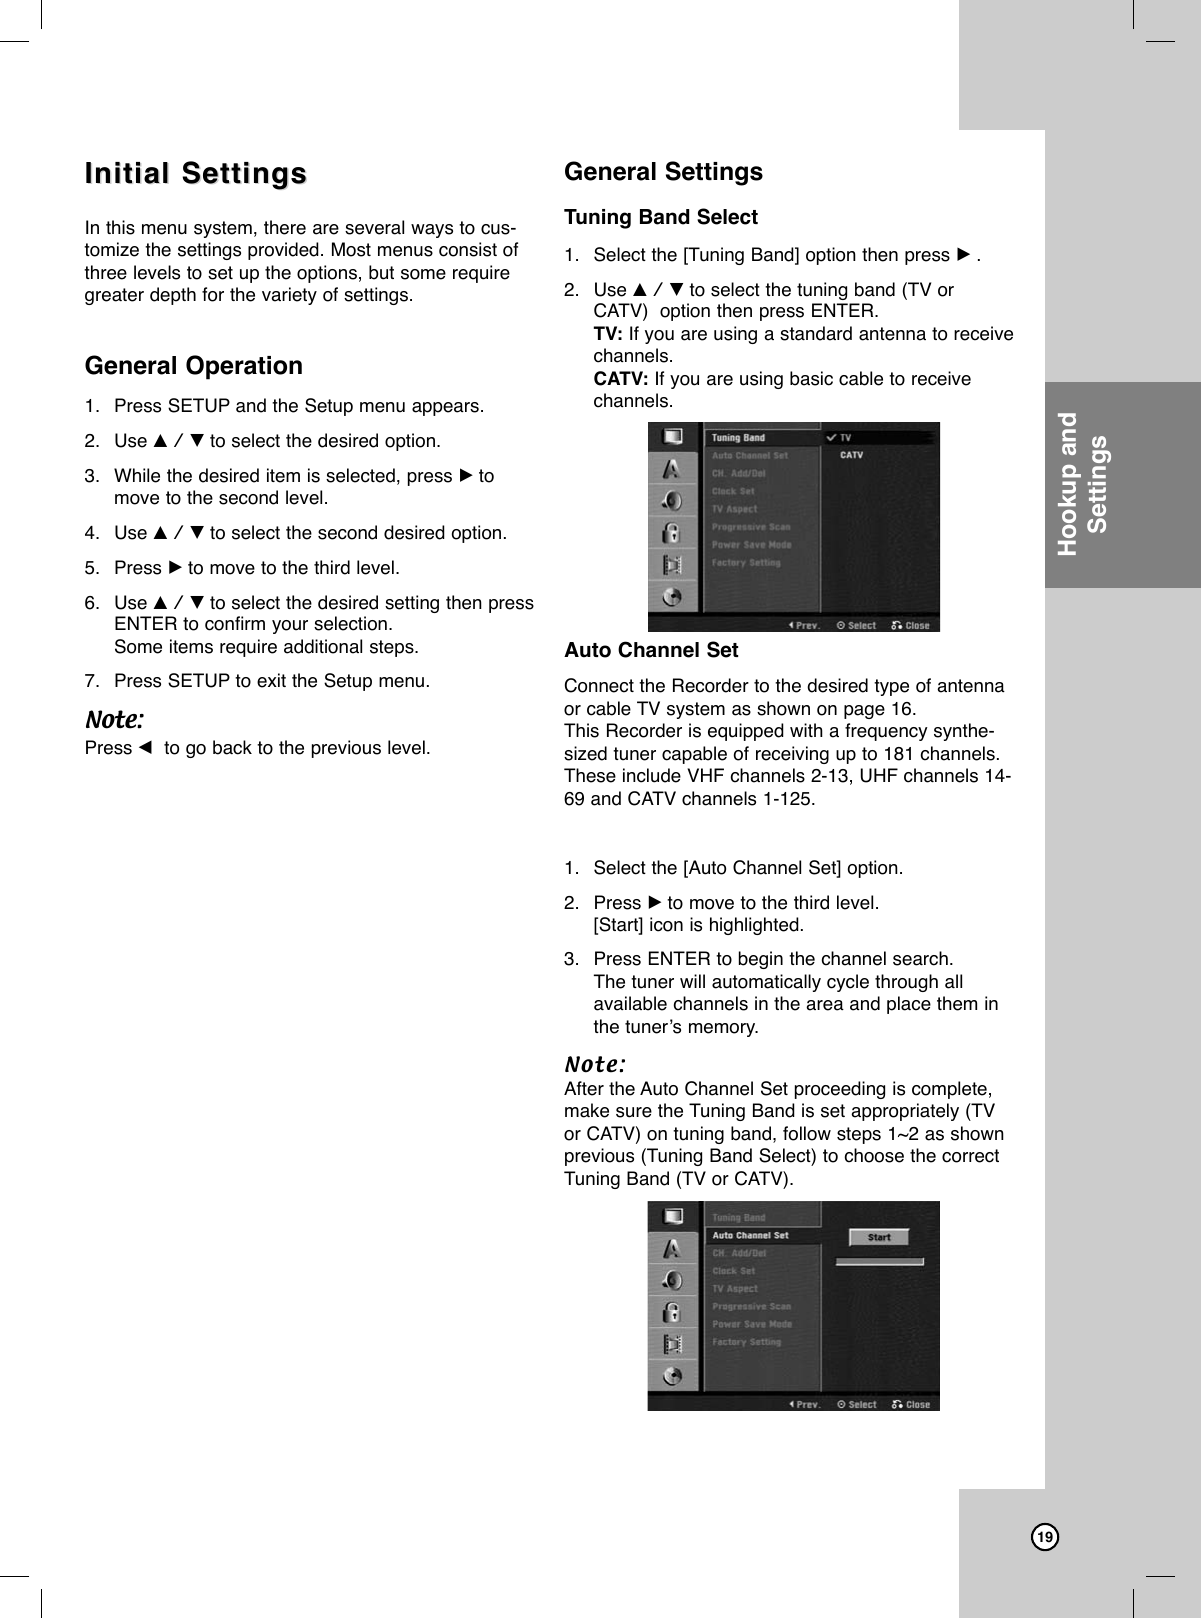 19Initial SettingsInitial SettingsIn this menu system, there are several ways to cus-tomize the settings provided. Most menus consist ofthree levels to set up the options, but some requiregreater depth for the variety of settings.General Operation1. Press SETUP and the Setup menu appears. 2. Use v / V to select the desired option.3. While the desired item is selected, press Btomove to the second level.4. Use v / V to select the second desired option.5. Press Bto move to the third level.6. Use v / V to select the desired setting then pressENTER to confirm your selection.Some items require additional steps.7. Press SETUP to exit the Setup menu.Note:Press bto go back to the previous level.General SettingsTuning Band Select1. Select the [Tuning Band] option then press B.2. Use v / V to select the tuning band (TV orCATV)  option then press ENTER.TV: If you are using a standard antenna to receivechannels. CATV: If you are using basic cable to receivechannels.Auto Channel SetConnect the Recorder to the desired type of antennaor cable TV system as shown on page 16.This Recorder is equipped with a frequency synthe-sized tuner capable of receiving up to 181 channels.These include VHF channels 2-13, UHF channels 14-69 and CATV channels 1-125. 1. Select the [Auto Channel Set] option.2. Press Bto move to the third level.[Start] icon is highlighted.3. Press ENTER to begin the channel search.The tuner will automatically cycle through all available channels in the area and place them inthe tuner’s memory.Note:After the Auto Channel Set proceeding is complete,make sure the Tuning Band is set appropriately (TVor CATV) on tuning band, follow steps 1~2 as shownprevious (Tuning Band Select) to choose the correctTuning Band (TV or CATV).Hookup andSettings